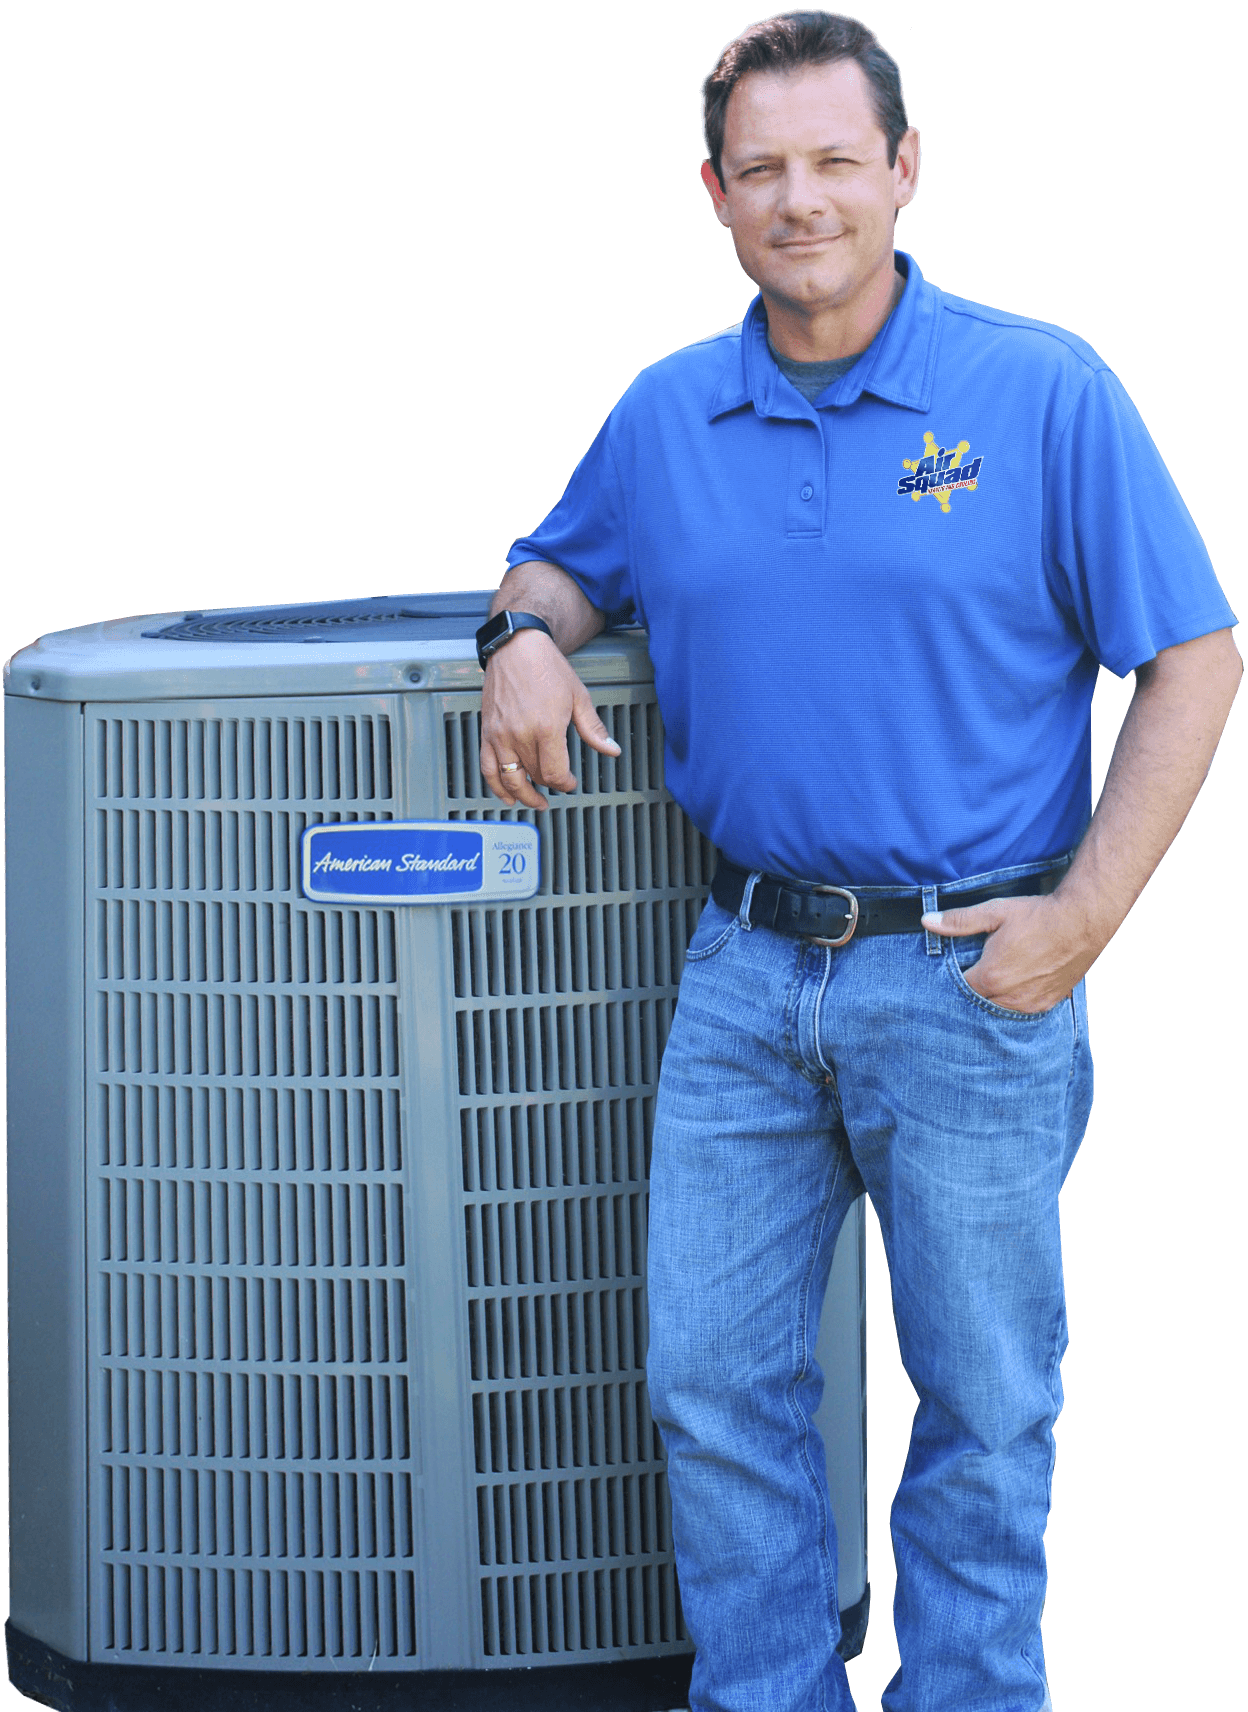 Owner Richard leaning on an AC unit.